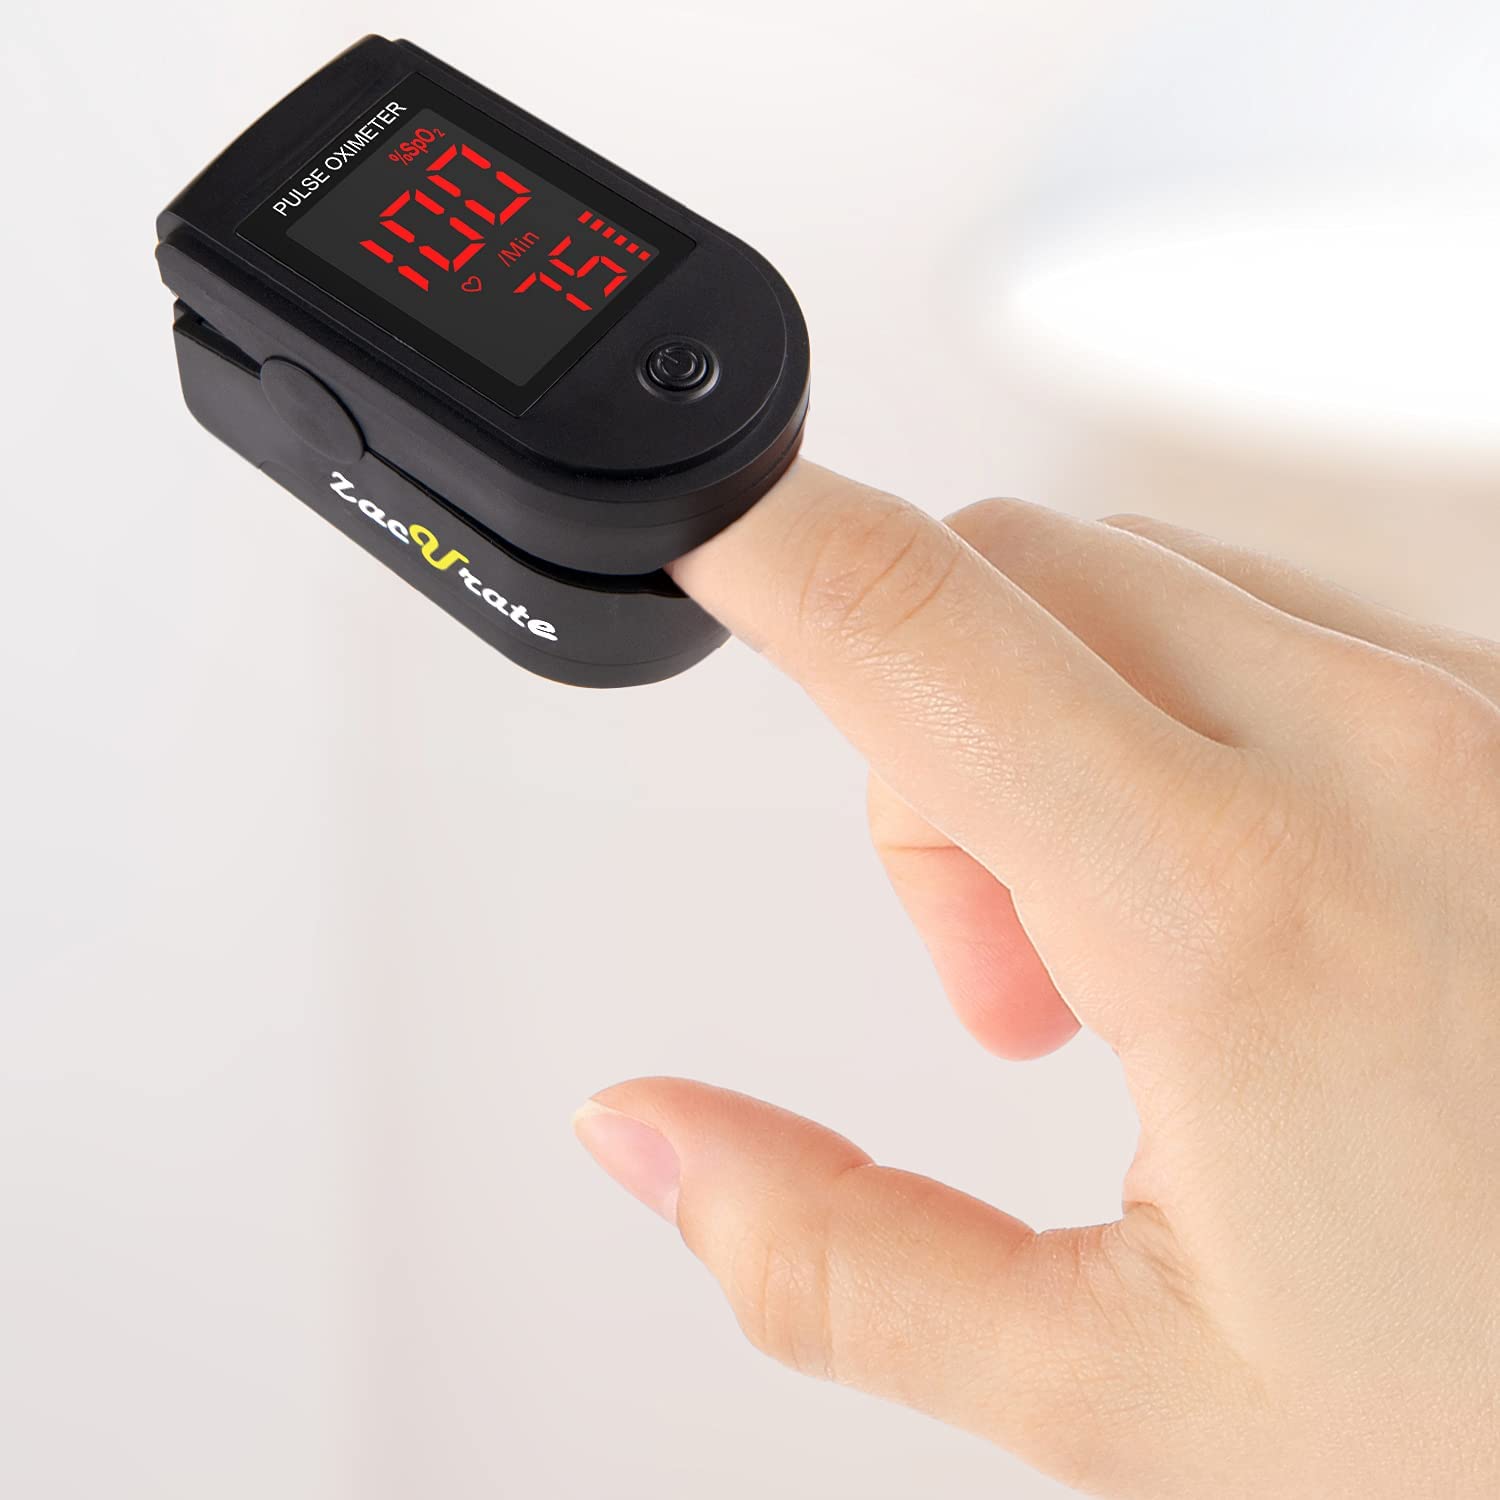  A close-up view of a finger inside of the black Zacurate 500DL Pro Series Pulse Oximeter 